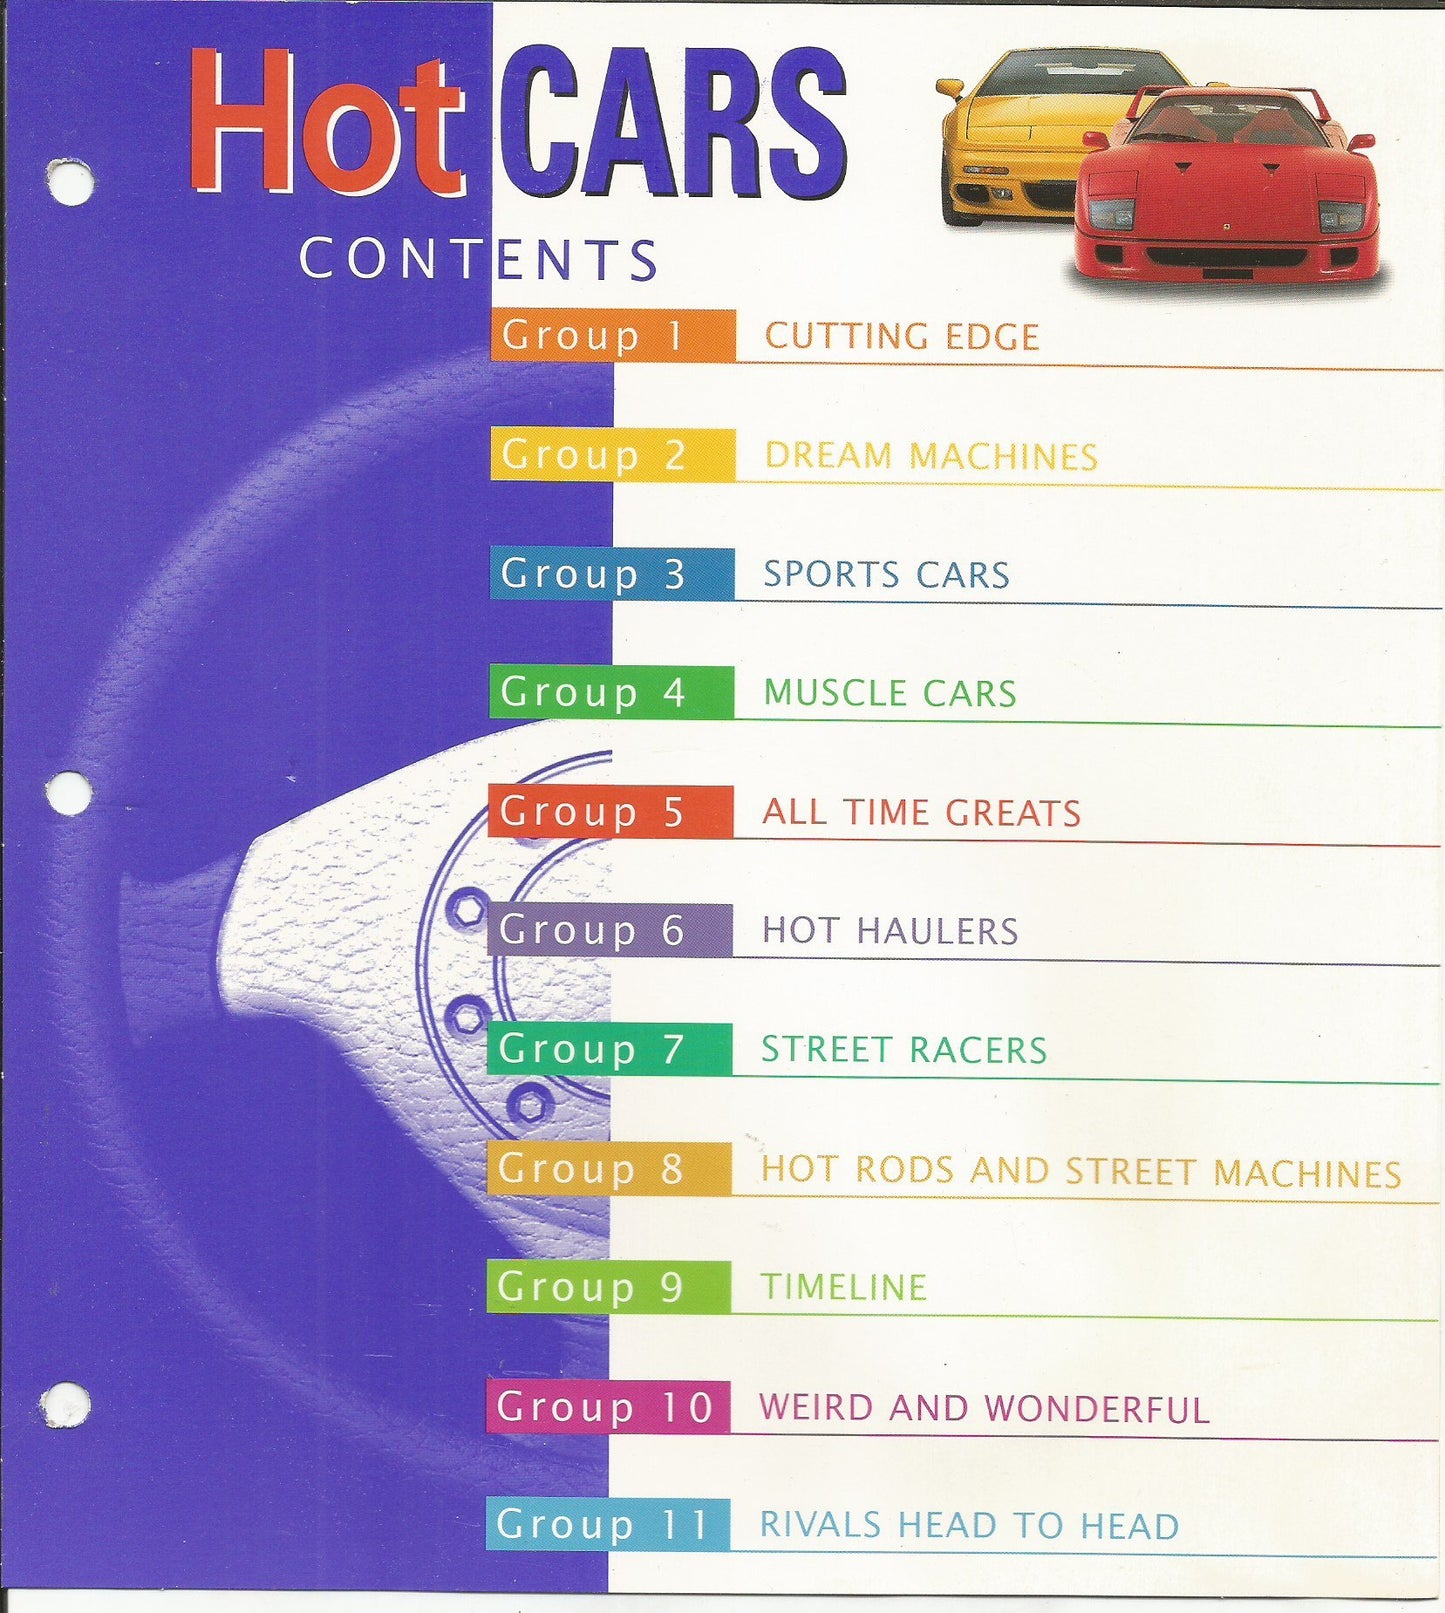 Hot Cars: Under the Hood, On the Track, Behind the Wheel [Ring-bound] International Masters Publishers